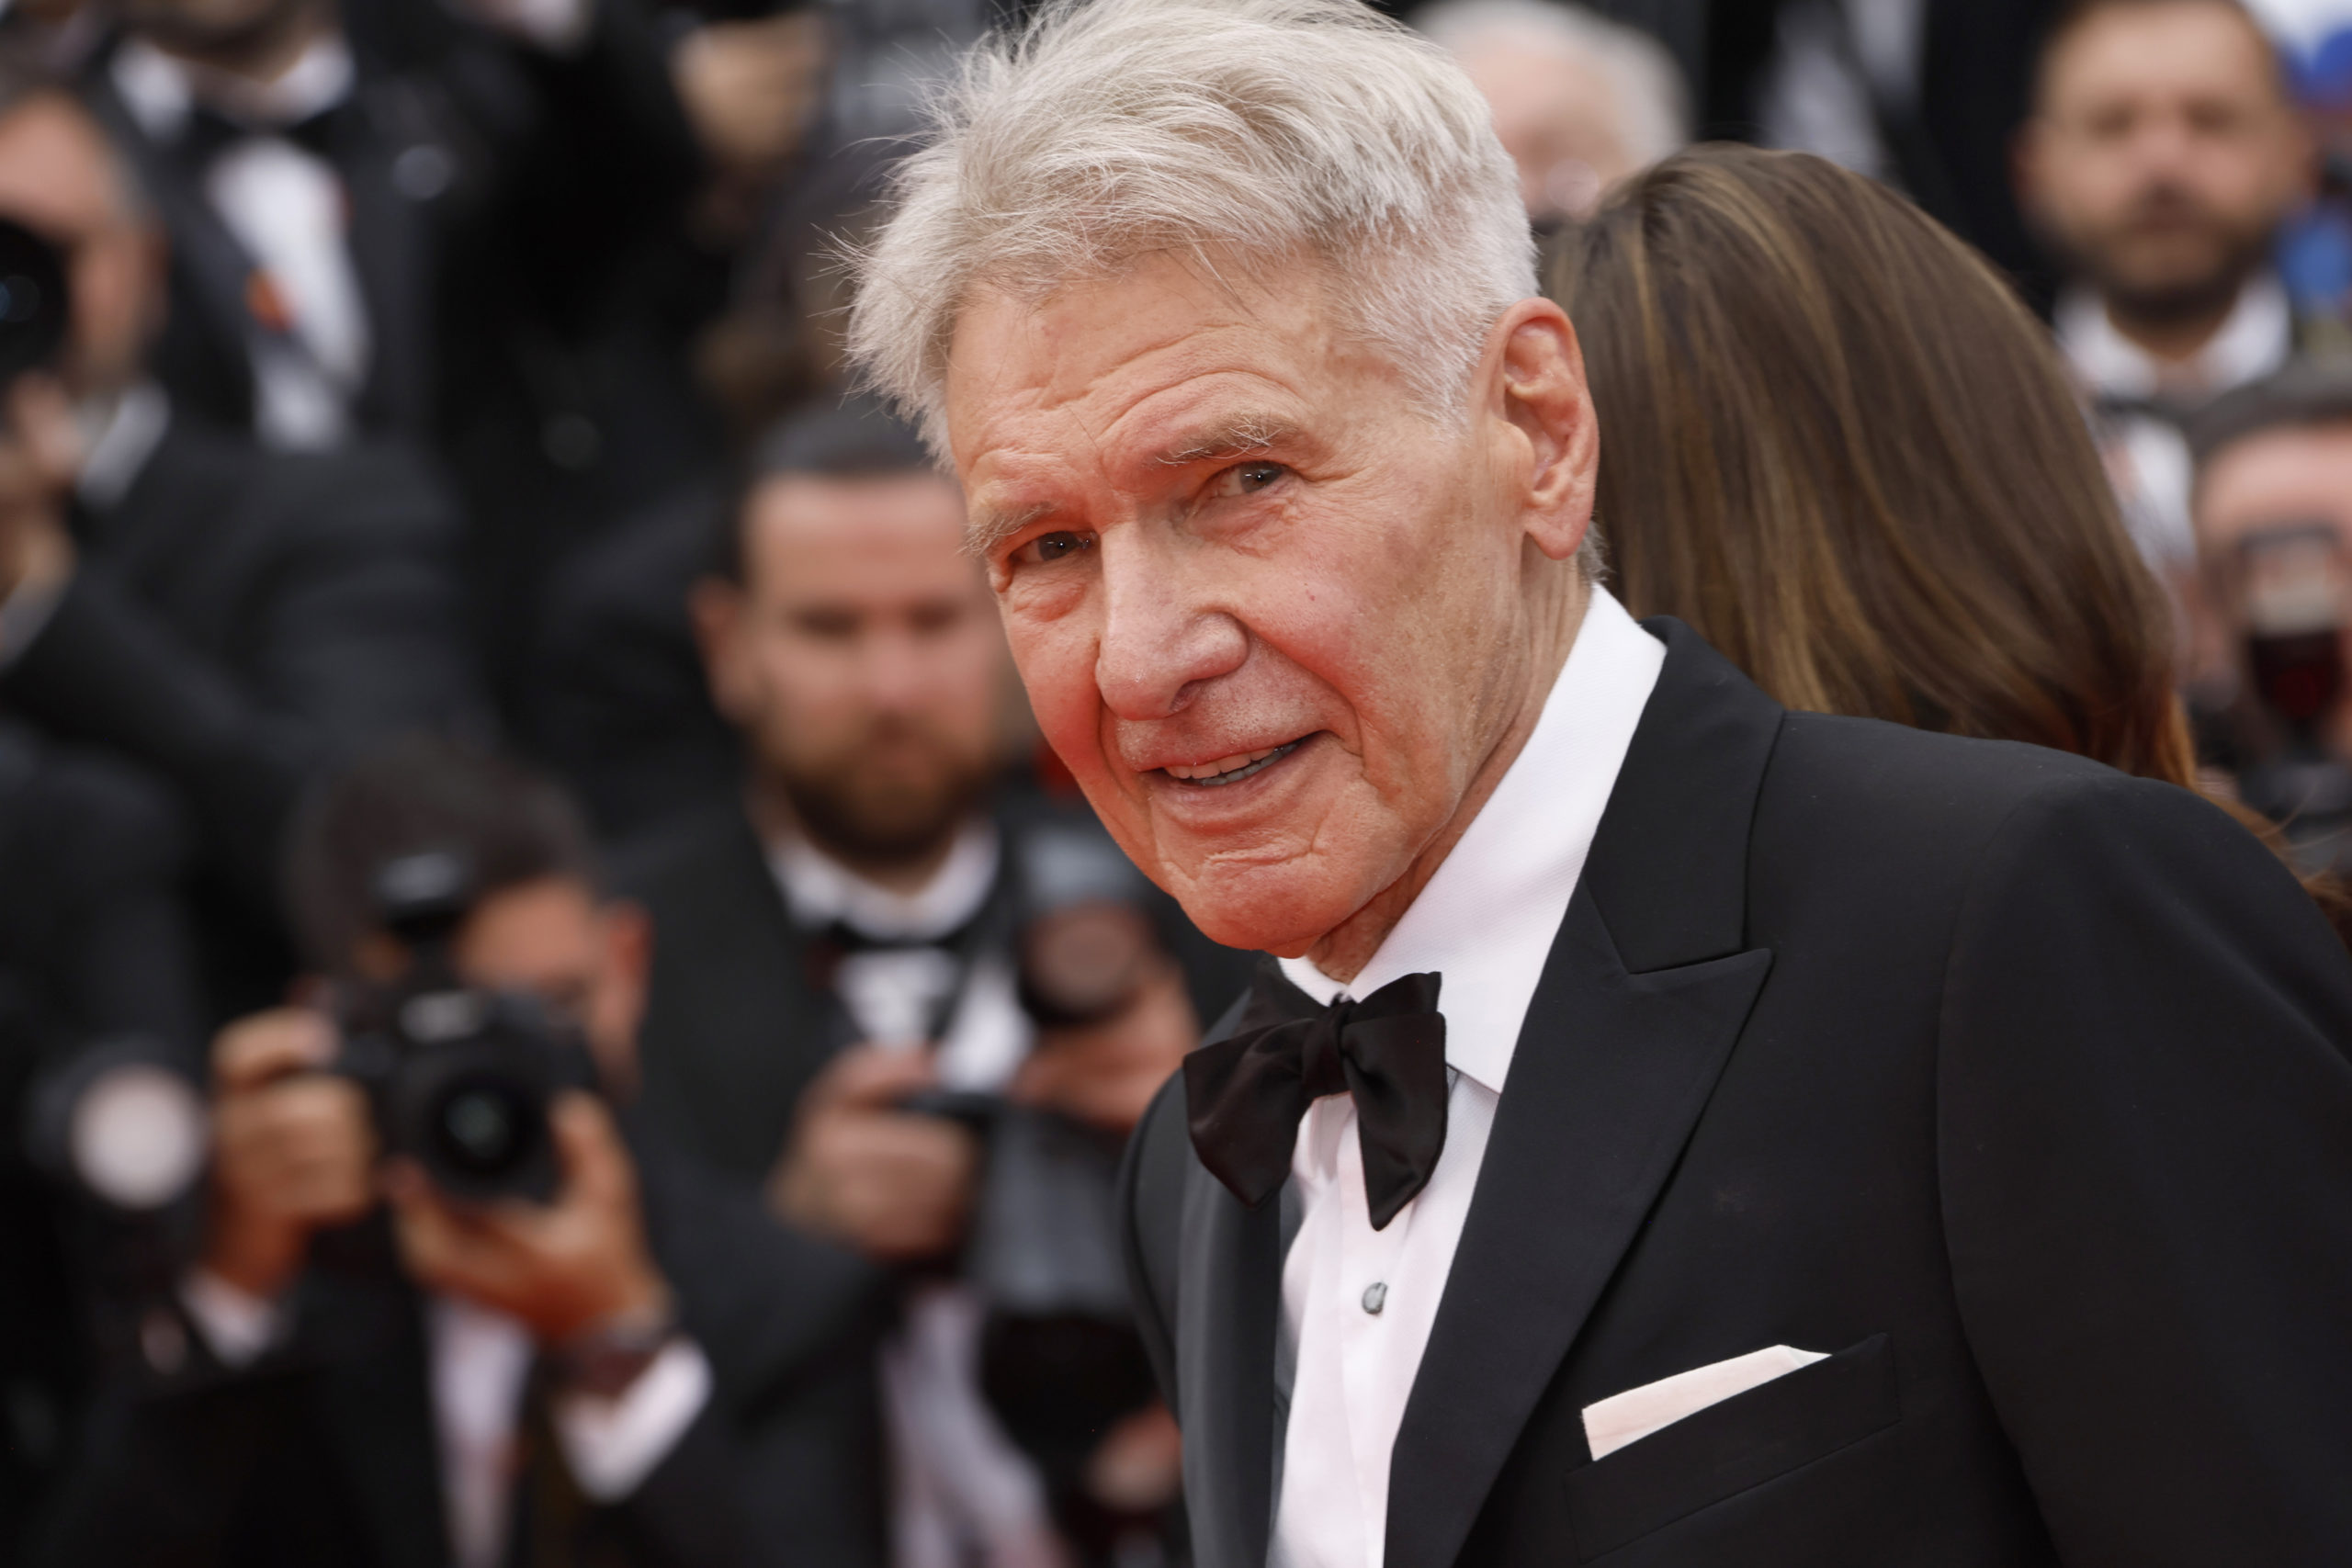 Harrison Ford retires iconic character, needs rest.